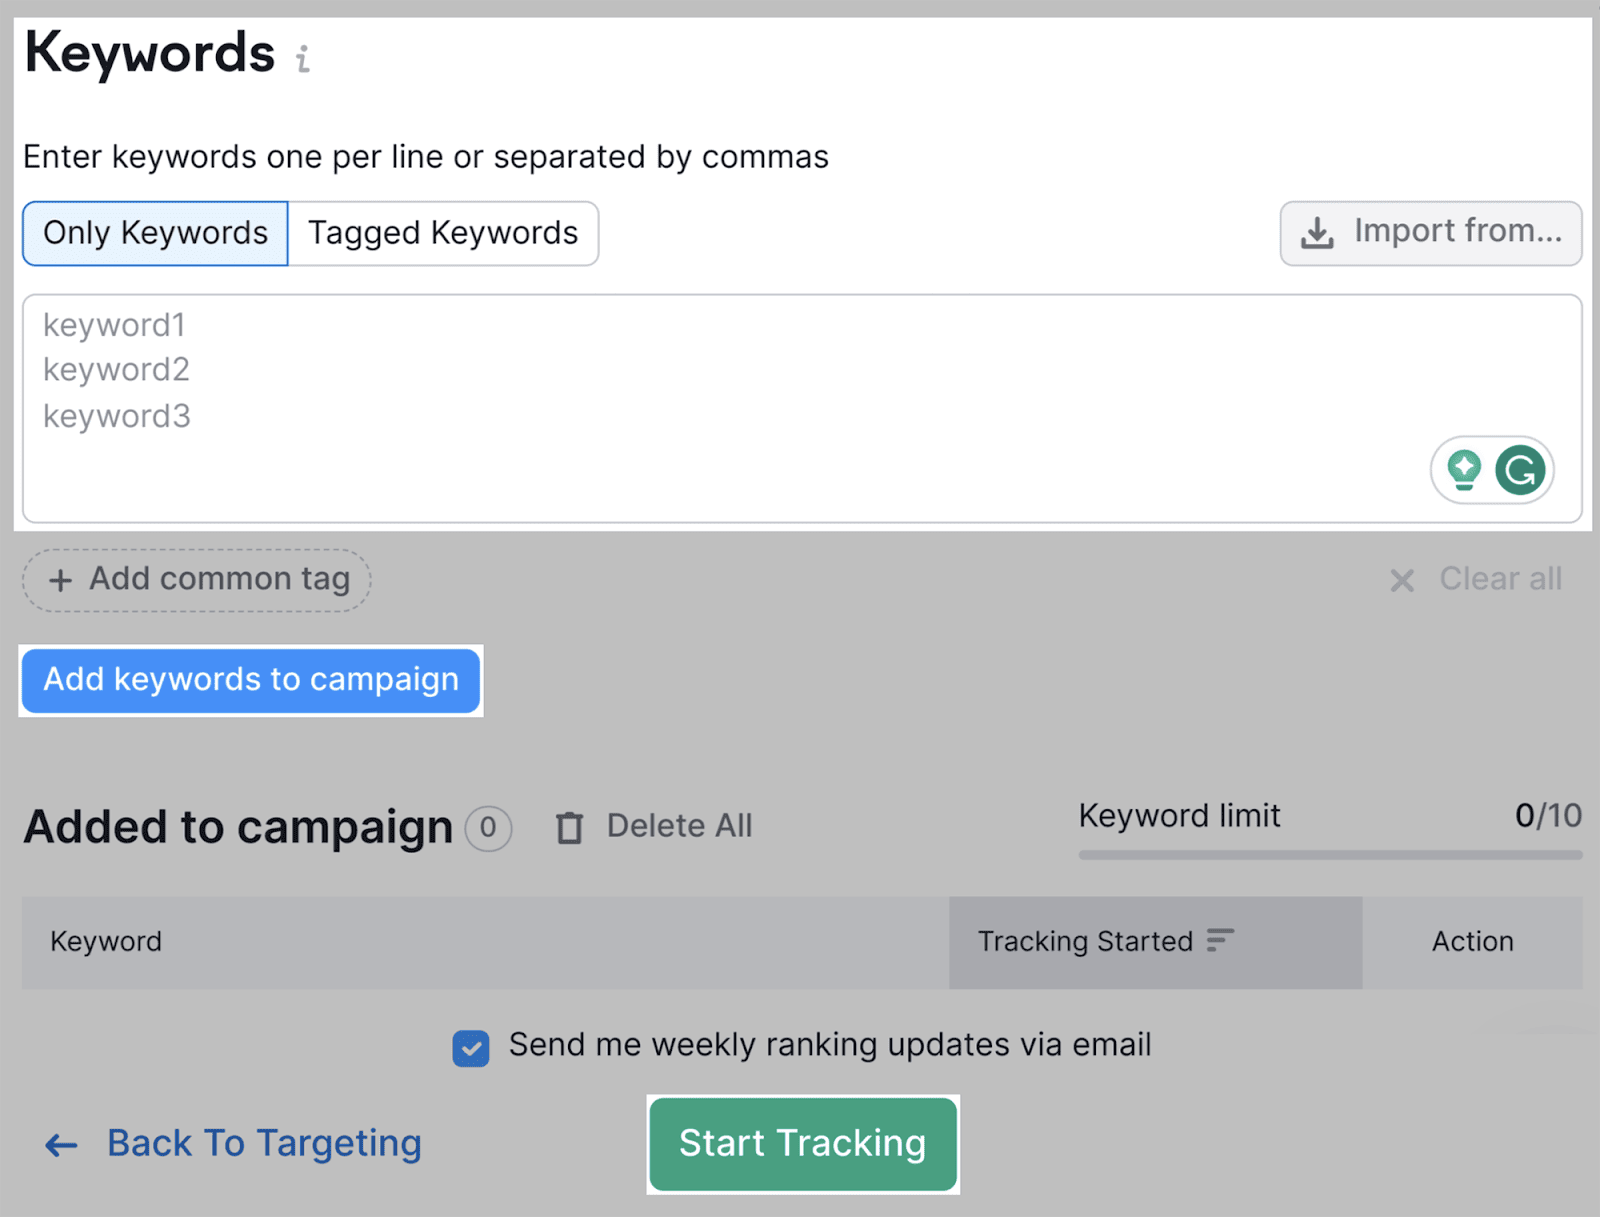 Add the campaign keywords to track